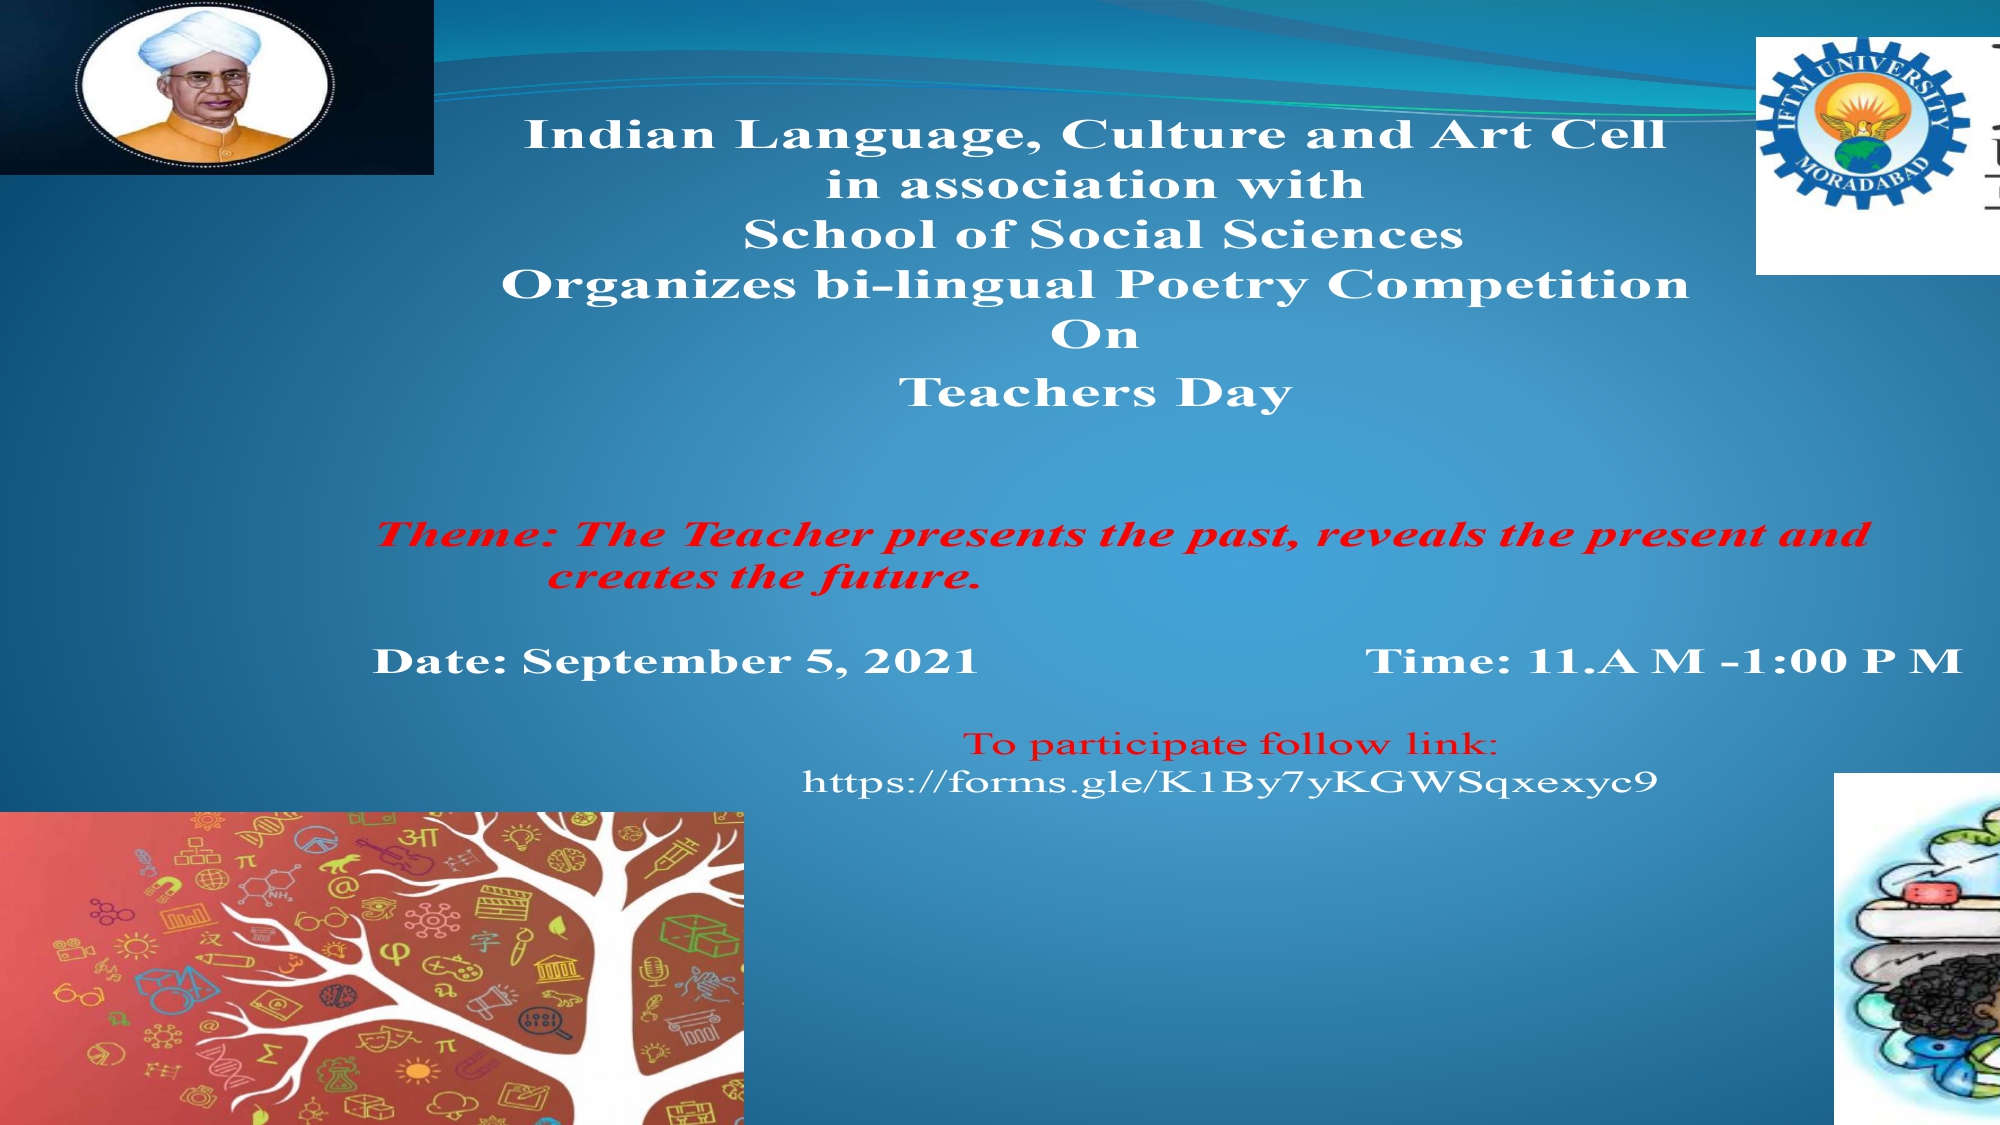 Bi-lingual poetry competition on Teachers Day